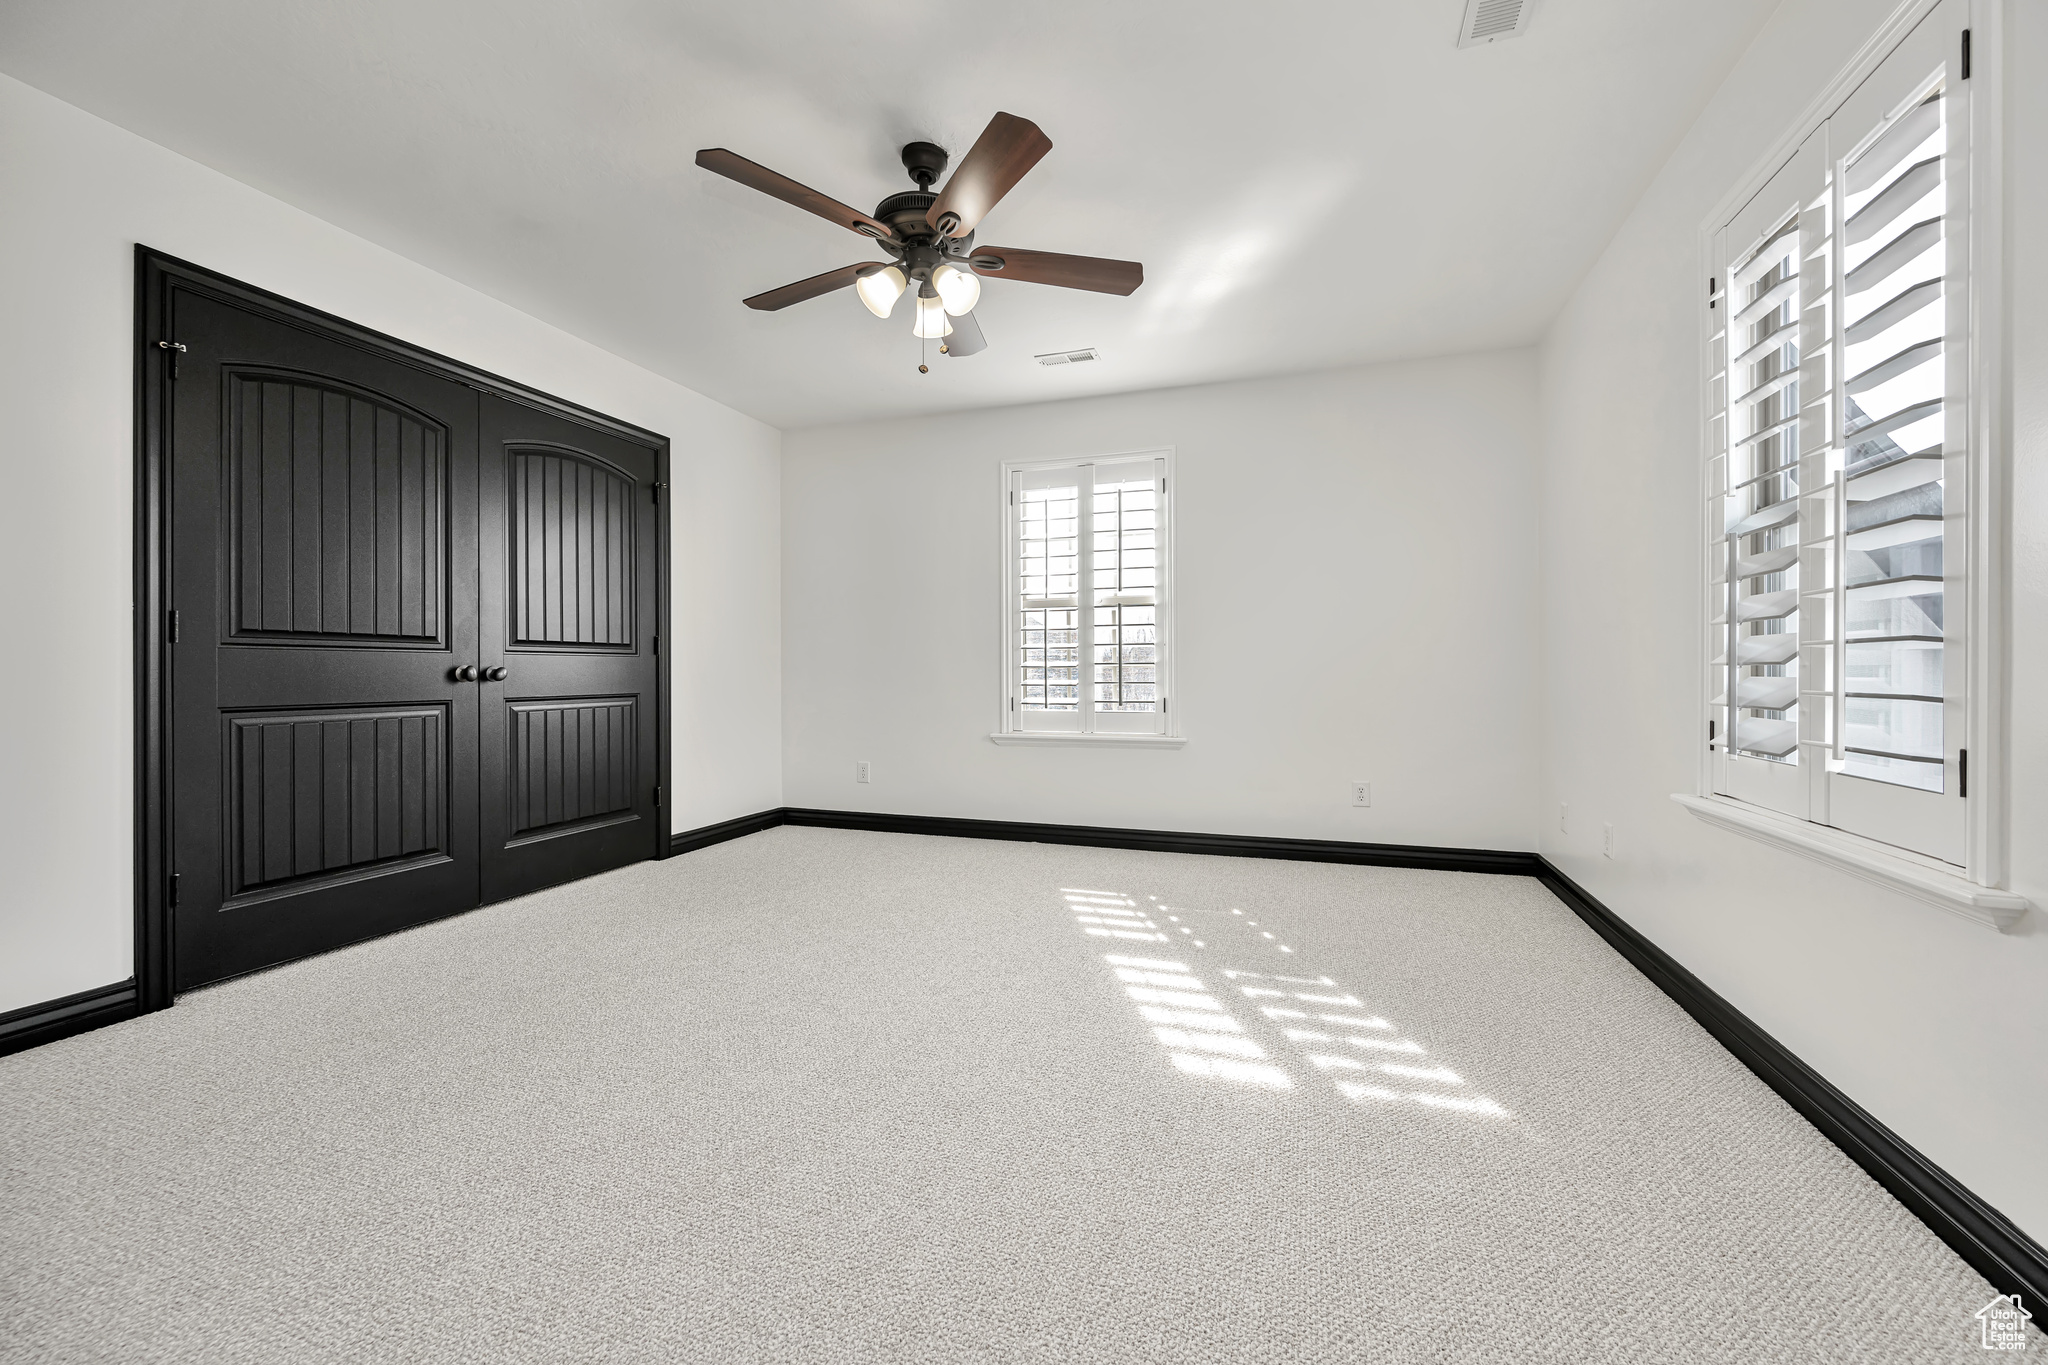 Bedroom 2 featuring light light-colored carpet and ceiling fan with a Jack/Jill bathroom